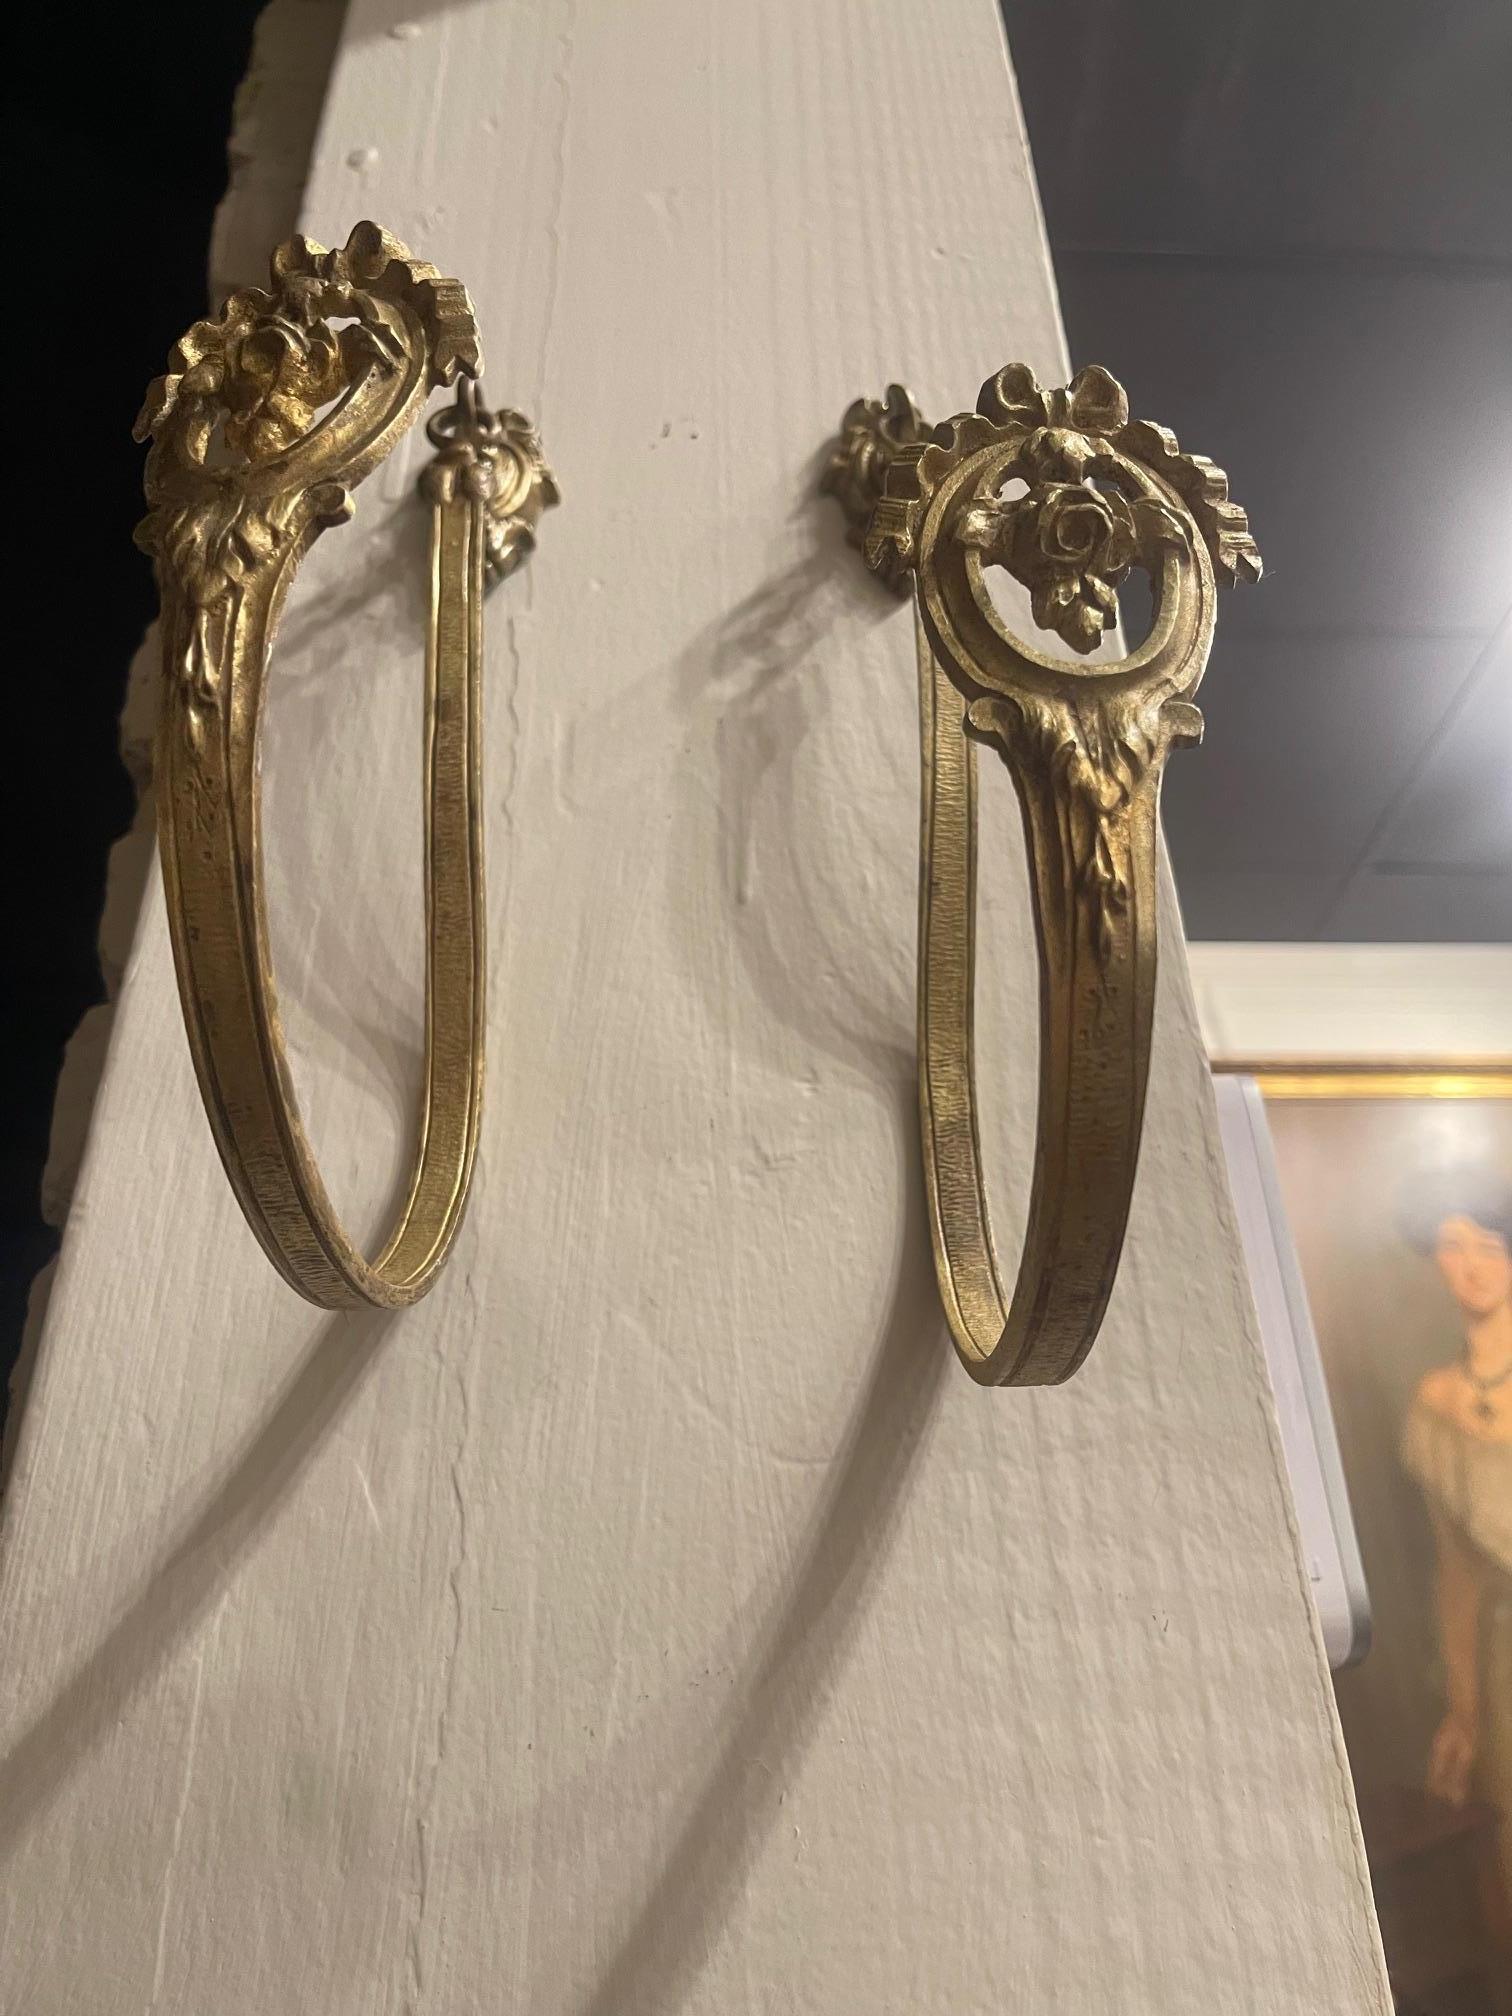 Pair of French Bronze and Brass Curtain Tiebacks or Curtain Holder, 19th Century For Sale 6